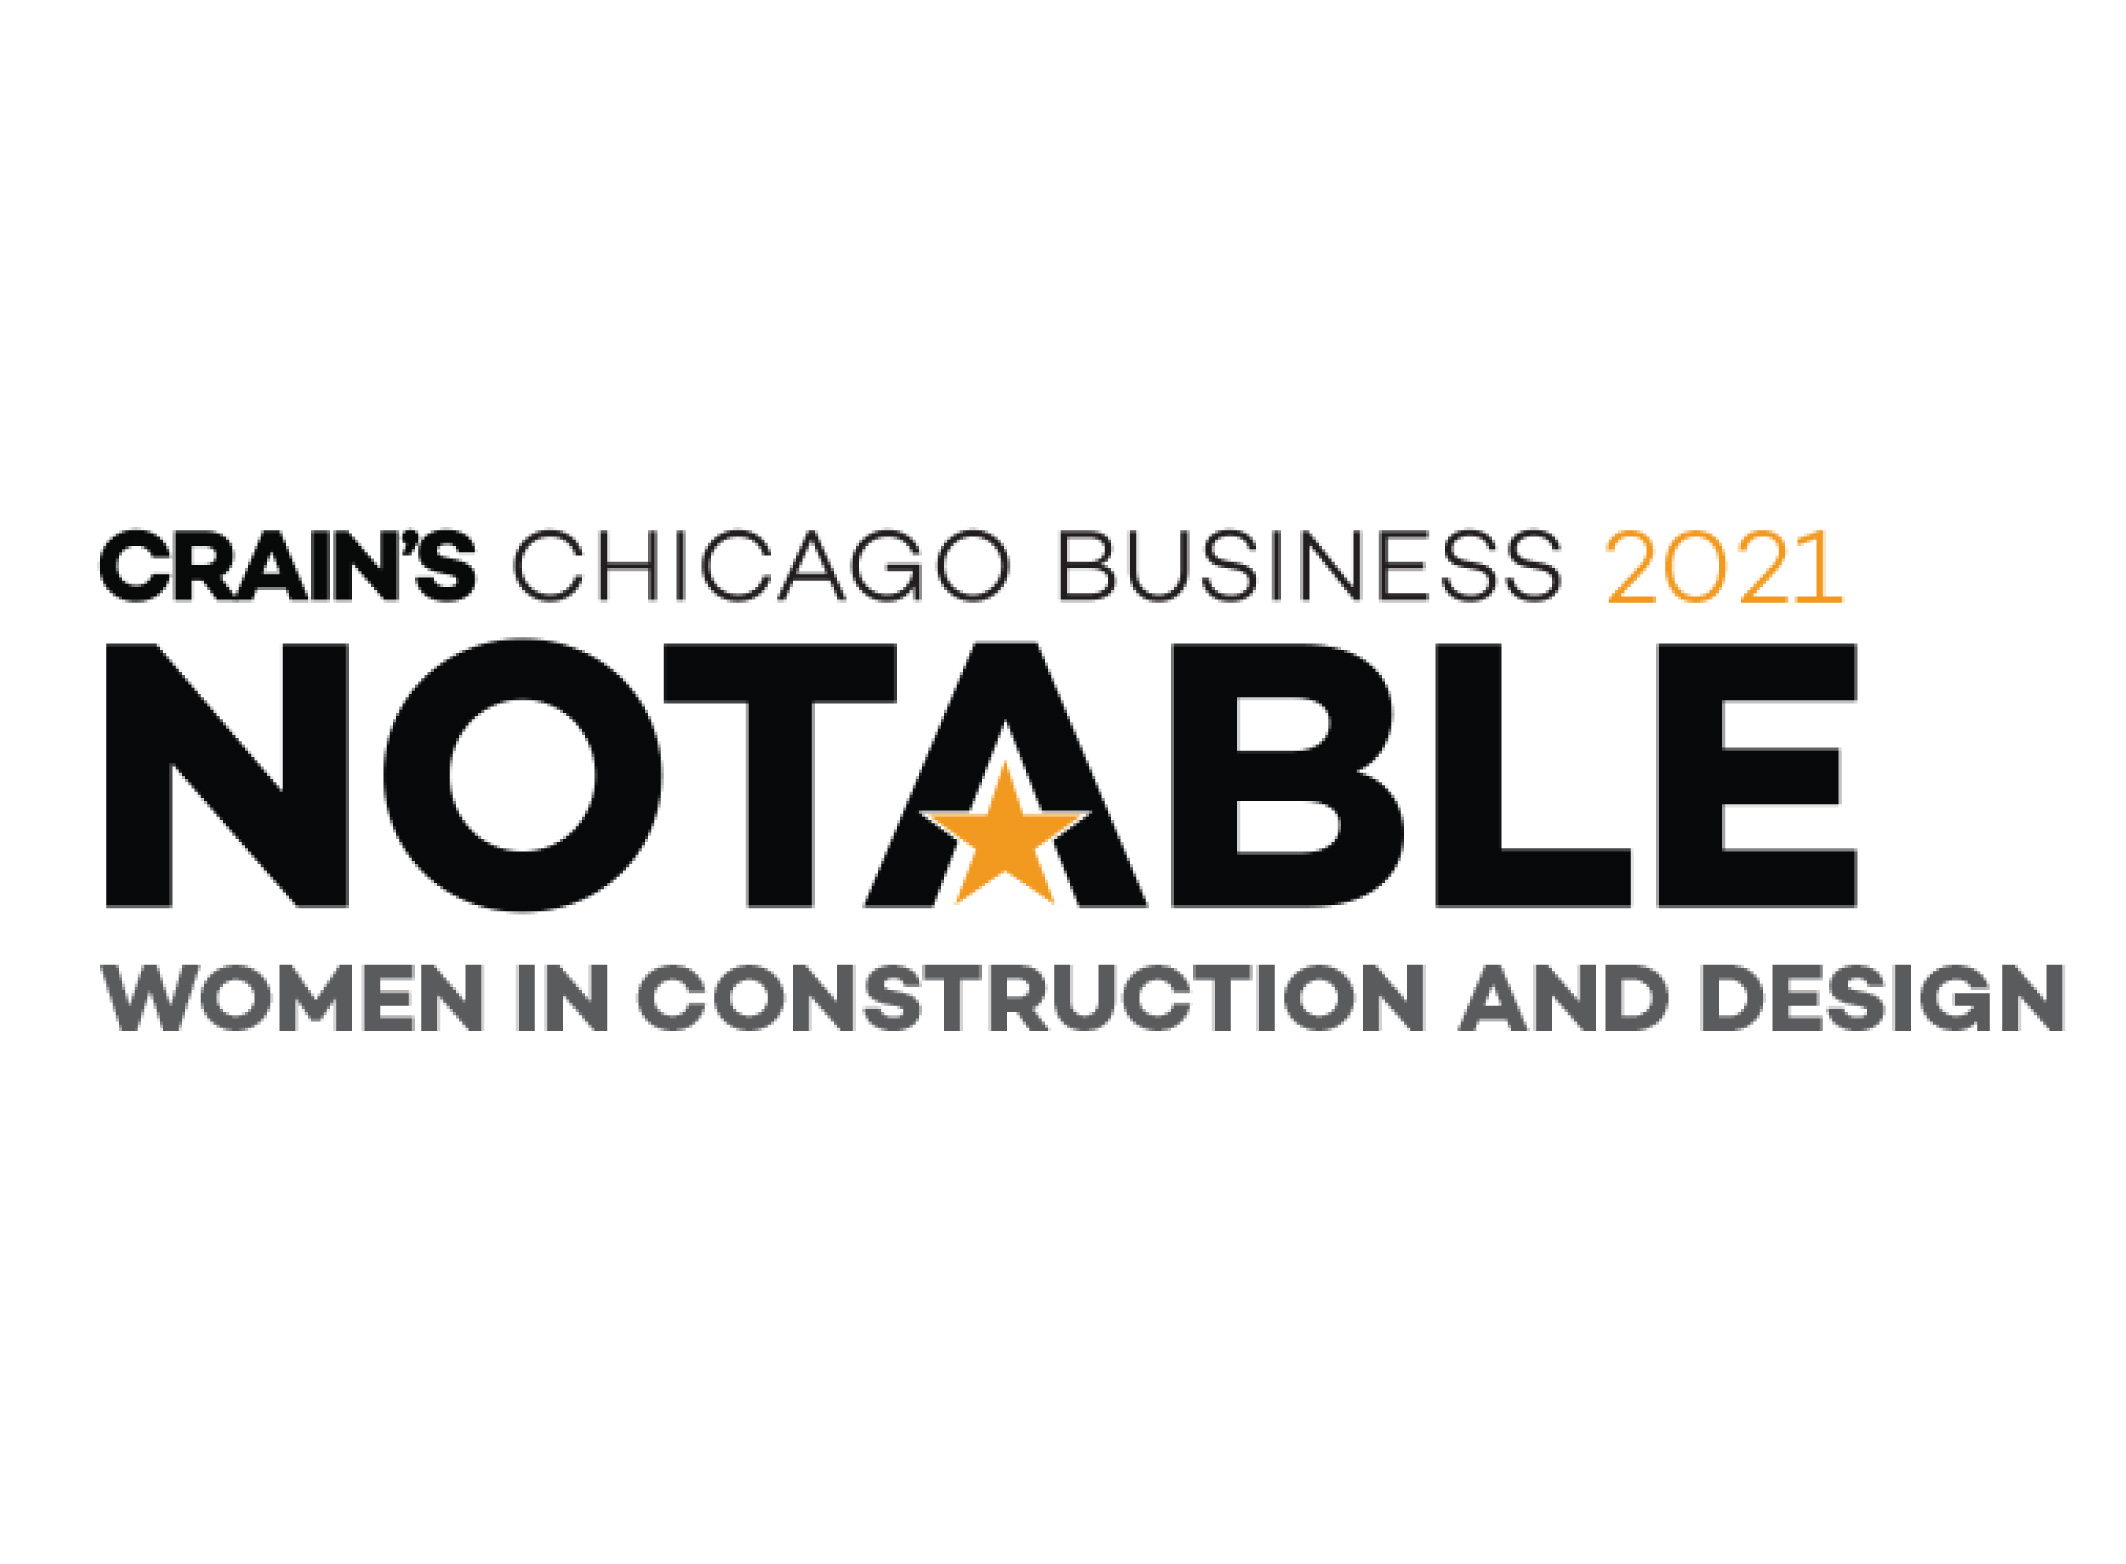 Vice President & Transportation Division Manager, Stacie Dovalovsky, Recognized in Crain’s 2021 Notable Women in Construction and Design